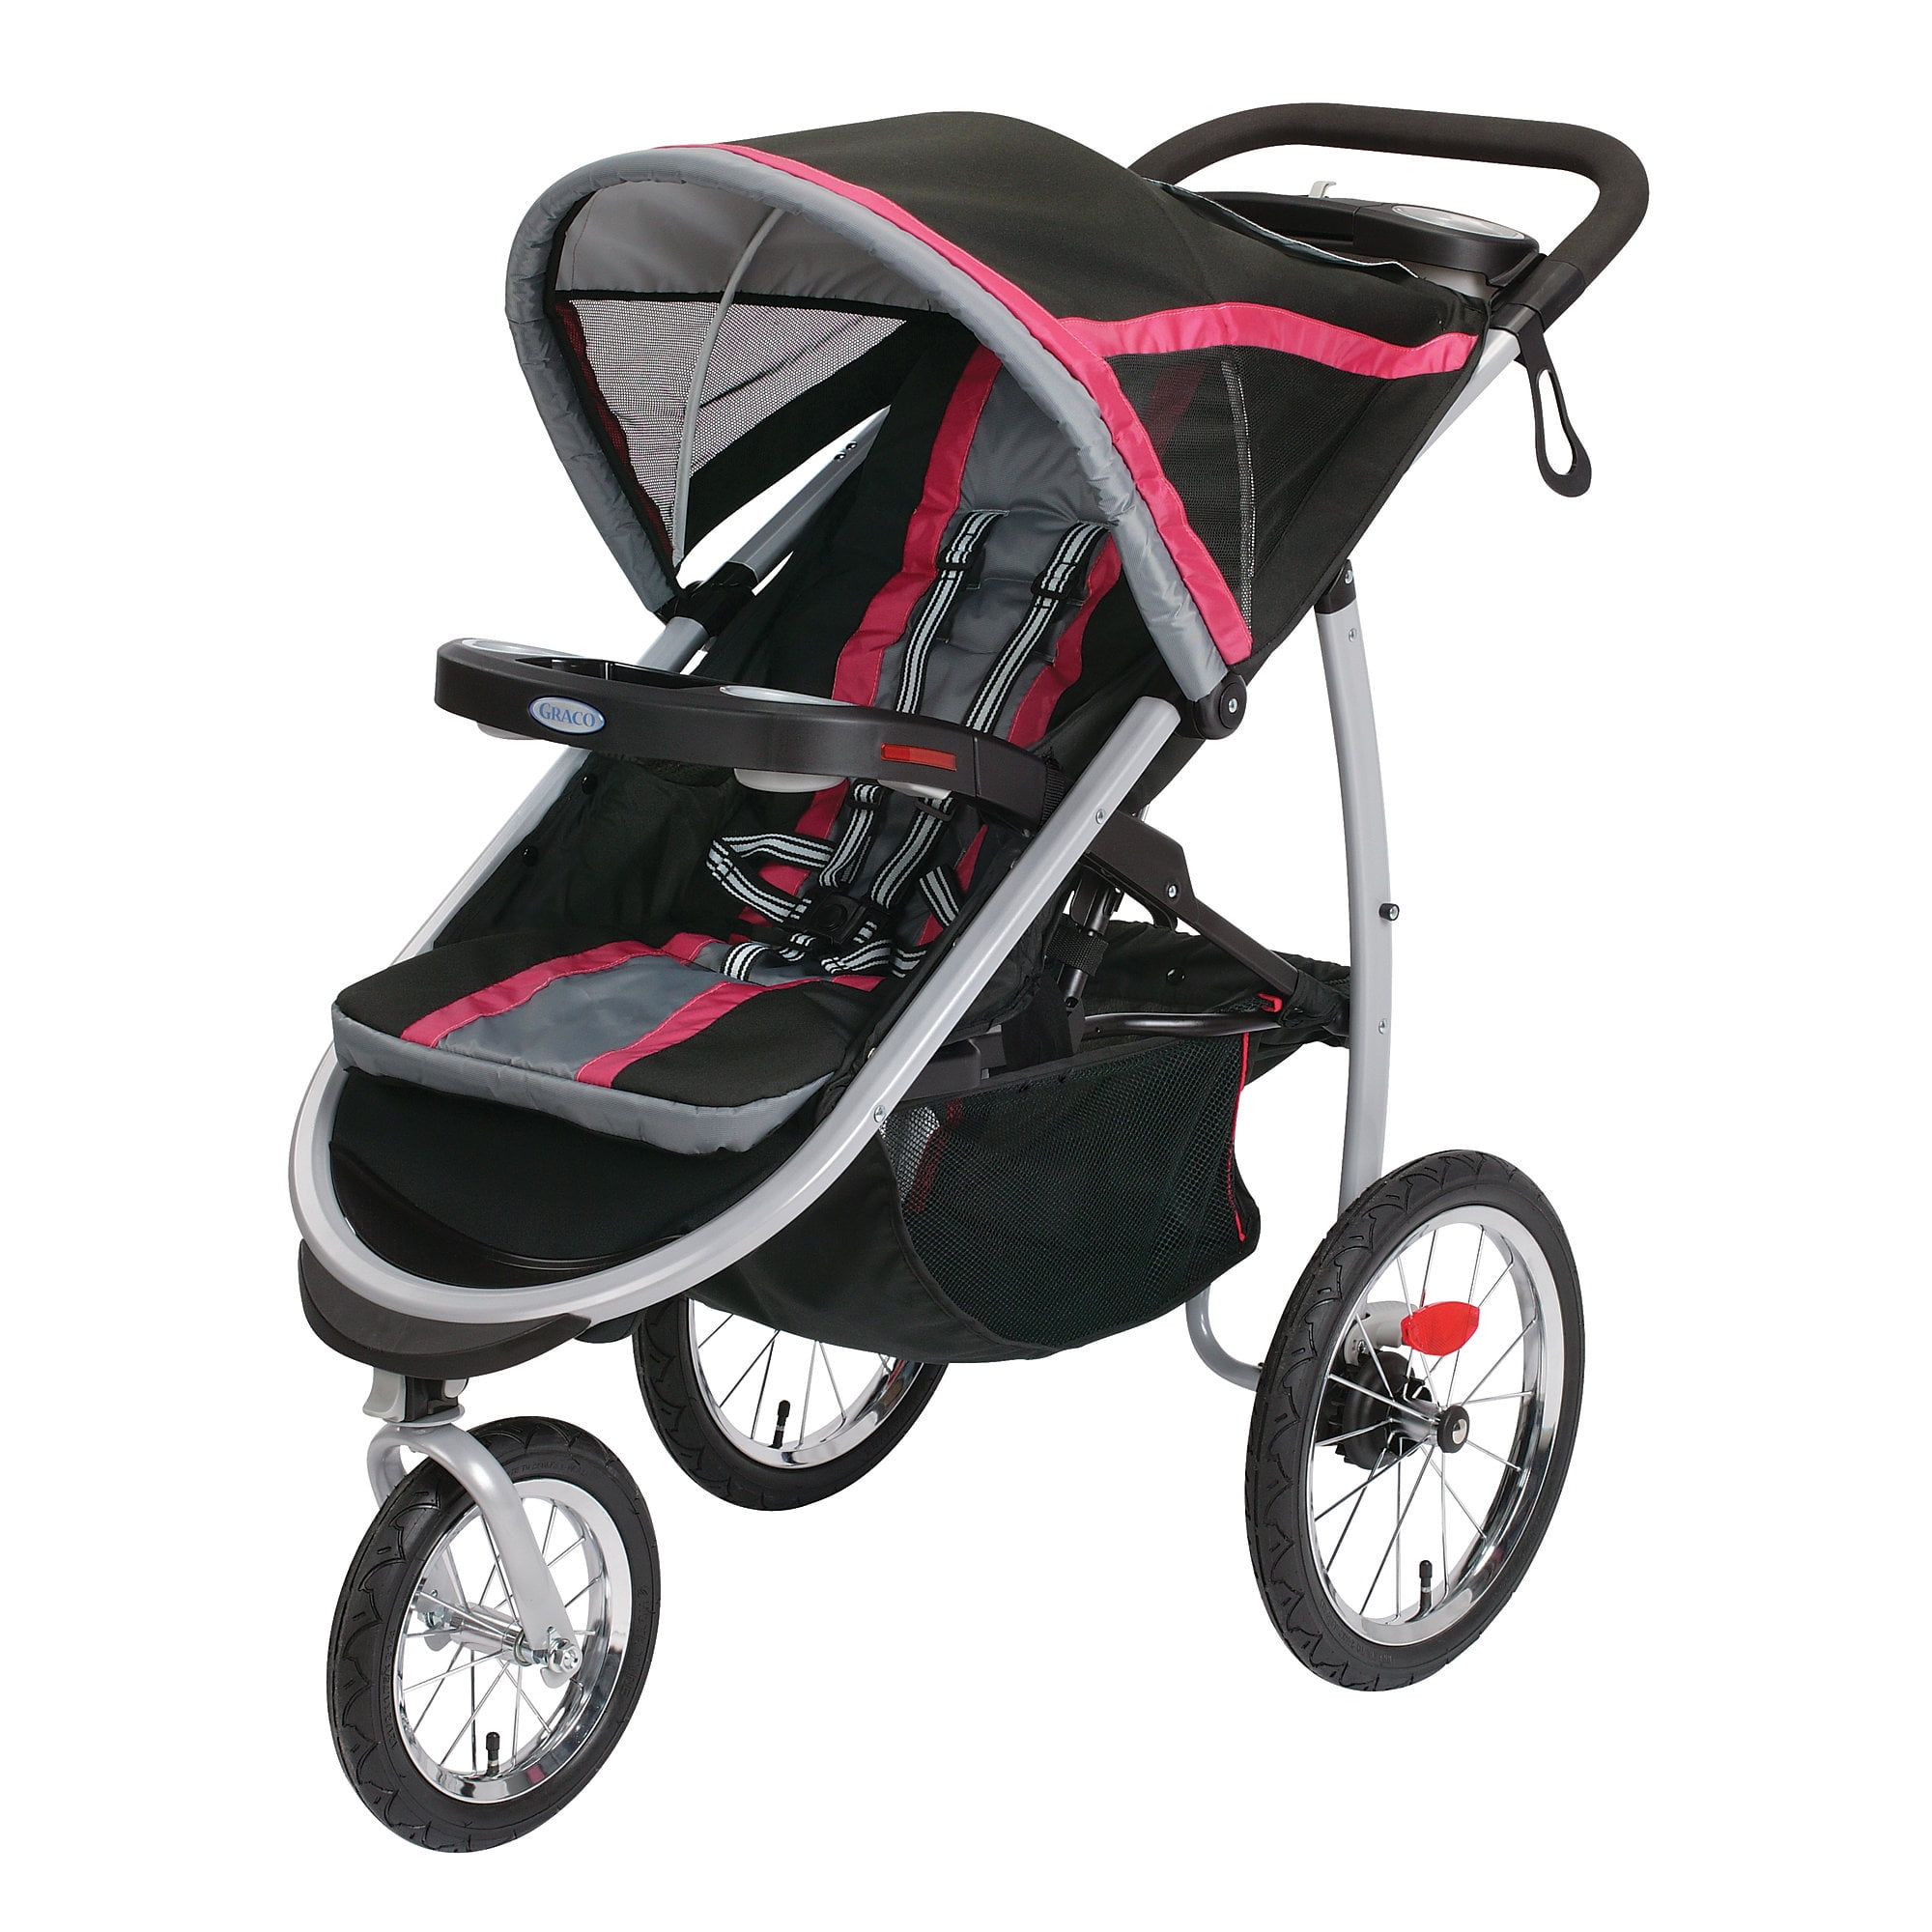 graco chili red modes jogger jogging stroller